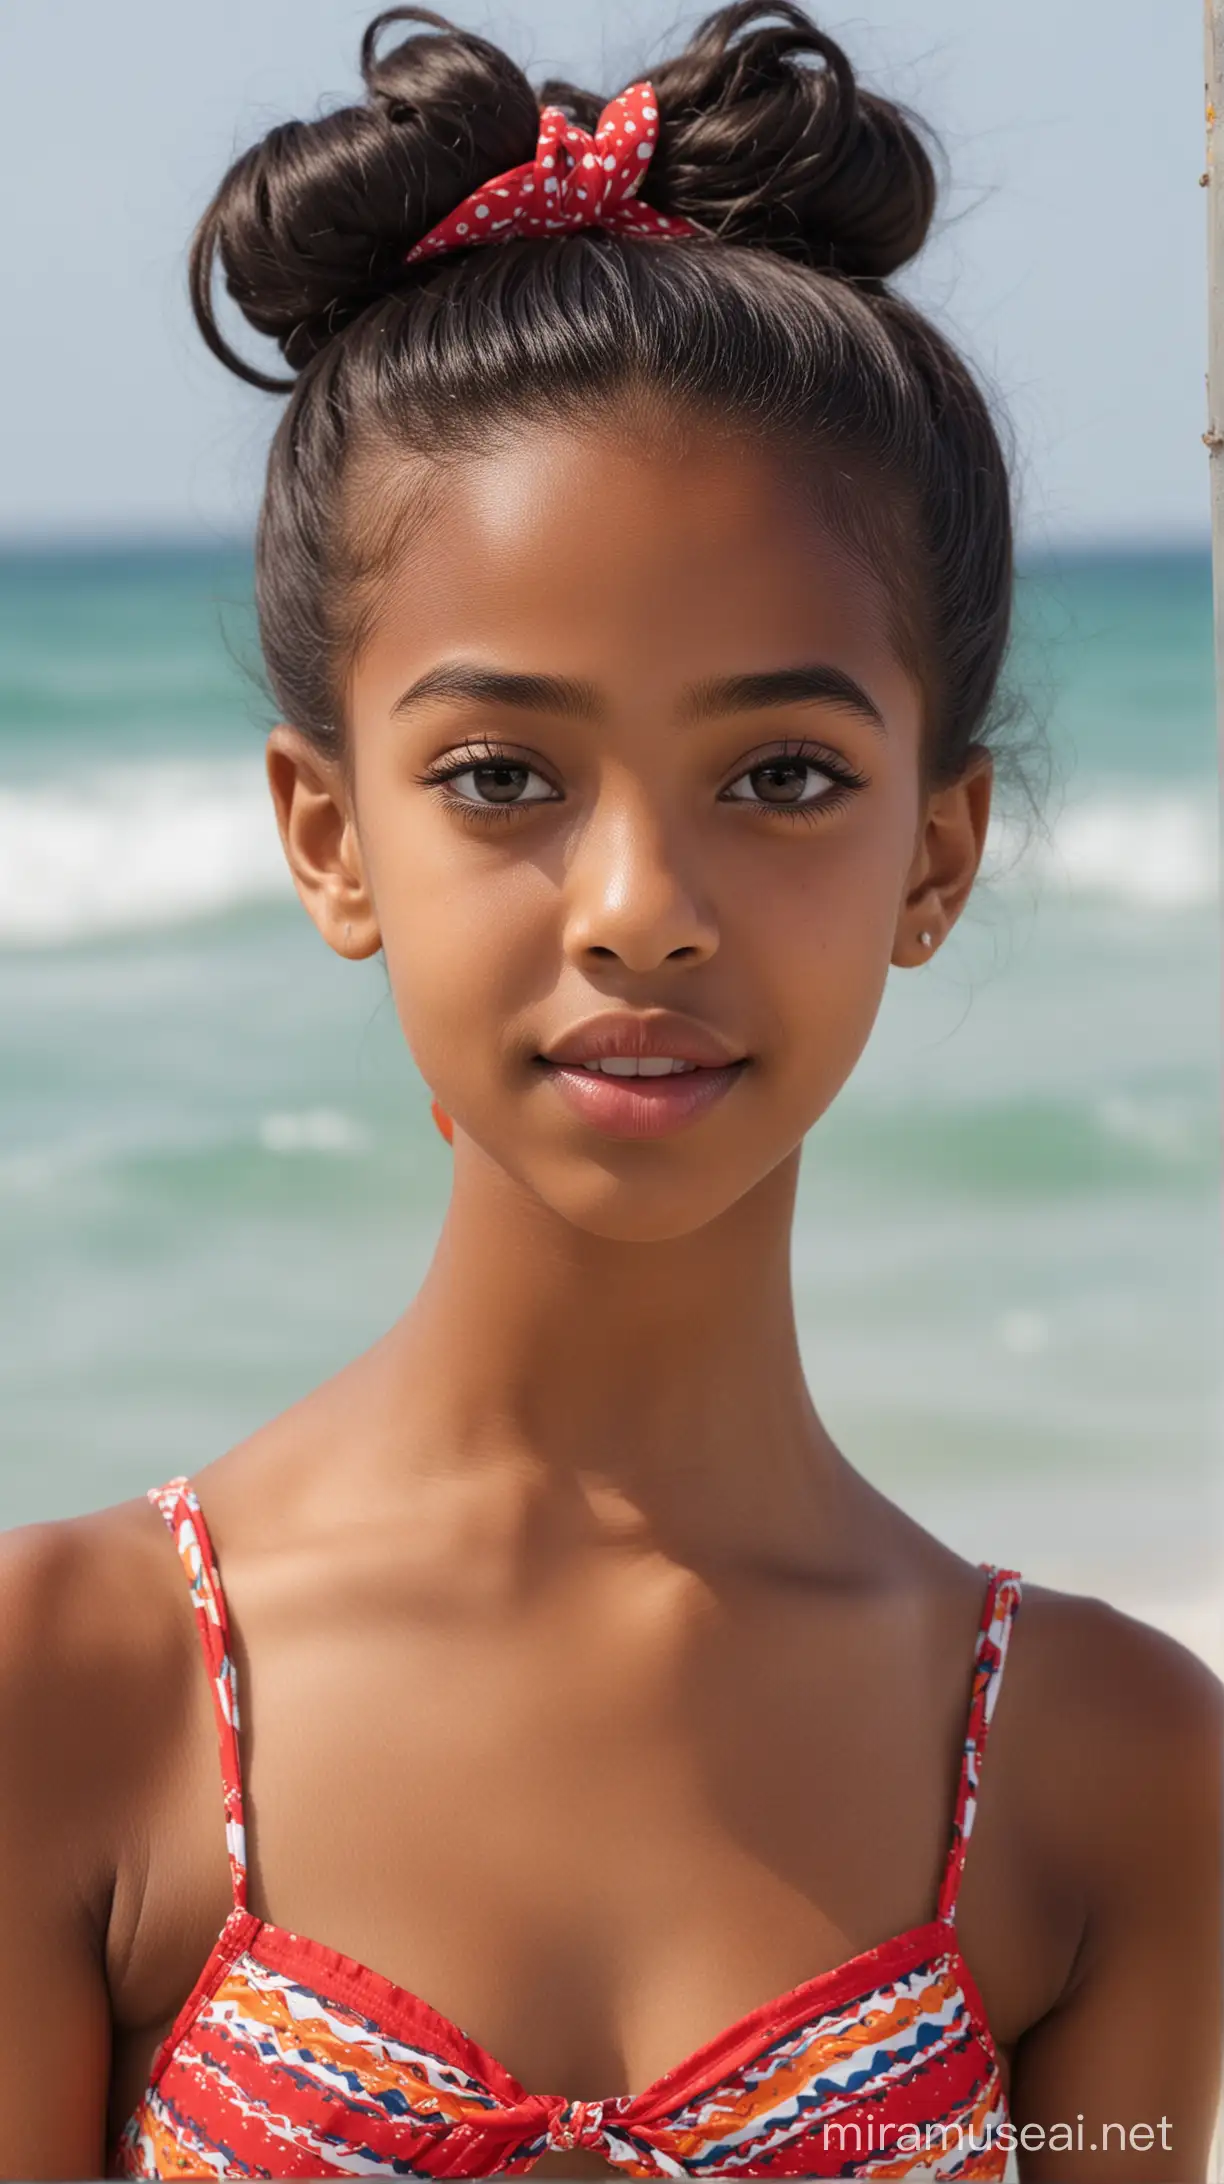 A 12 year old skinny black woman with big eyes, straight nose, small red lips, sharp chin and long straight black hair with a bun at back wearing a bikini at a beach